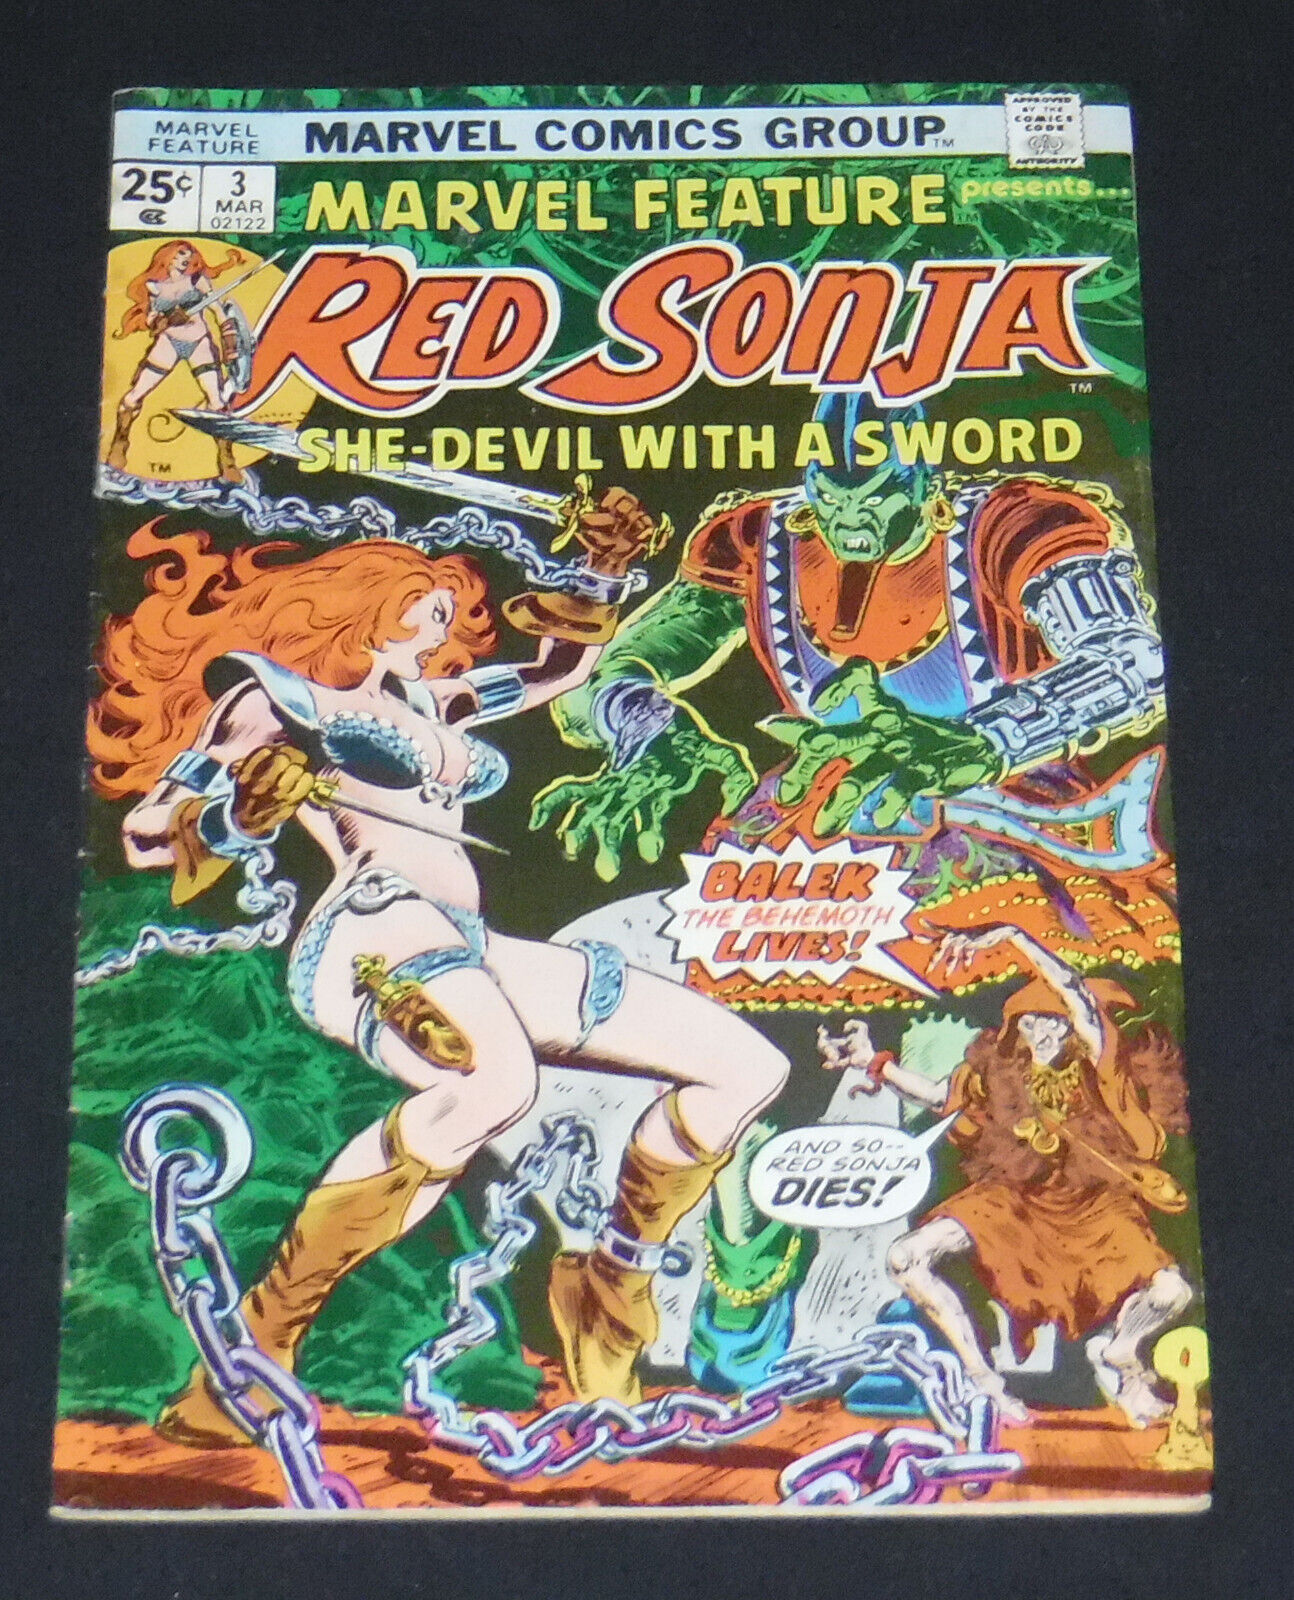 MARVEL FEATURE Presents RED SONJA #3 1975 